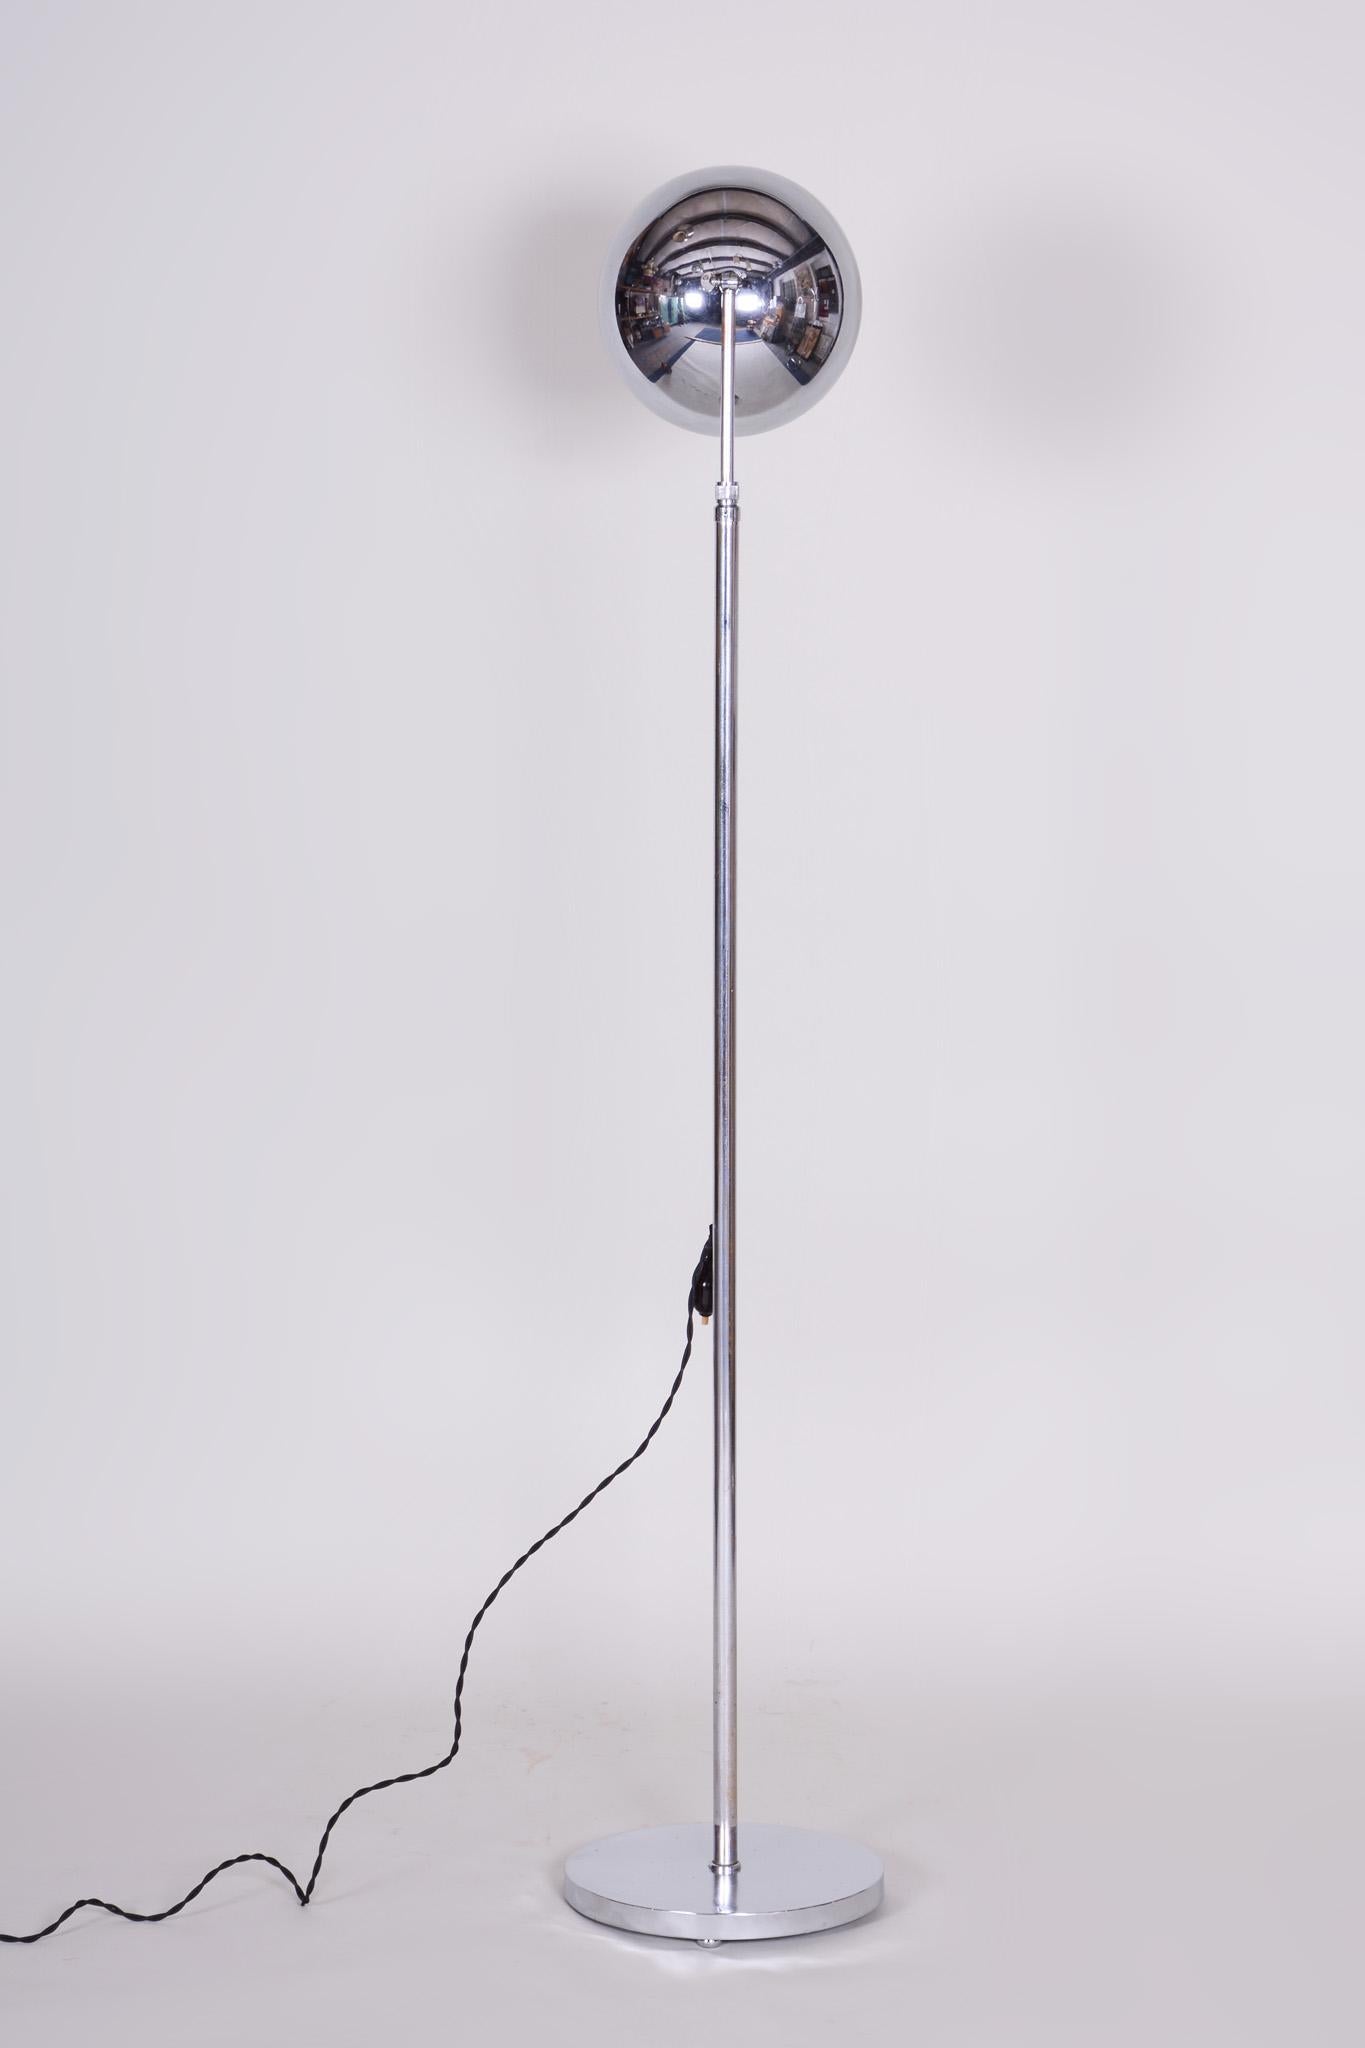 Restored Bauhaus Floor Lamp Made in the 1930s, Made Out of Chrome Plated Steel For Sale 6